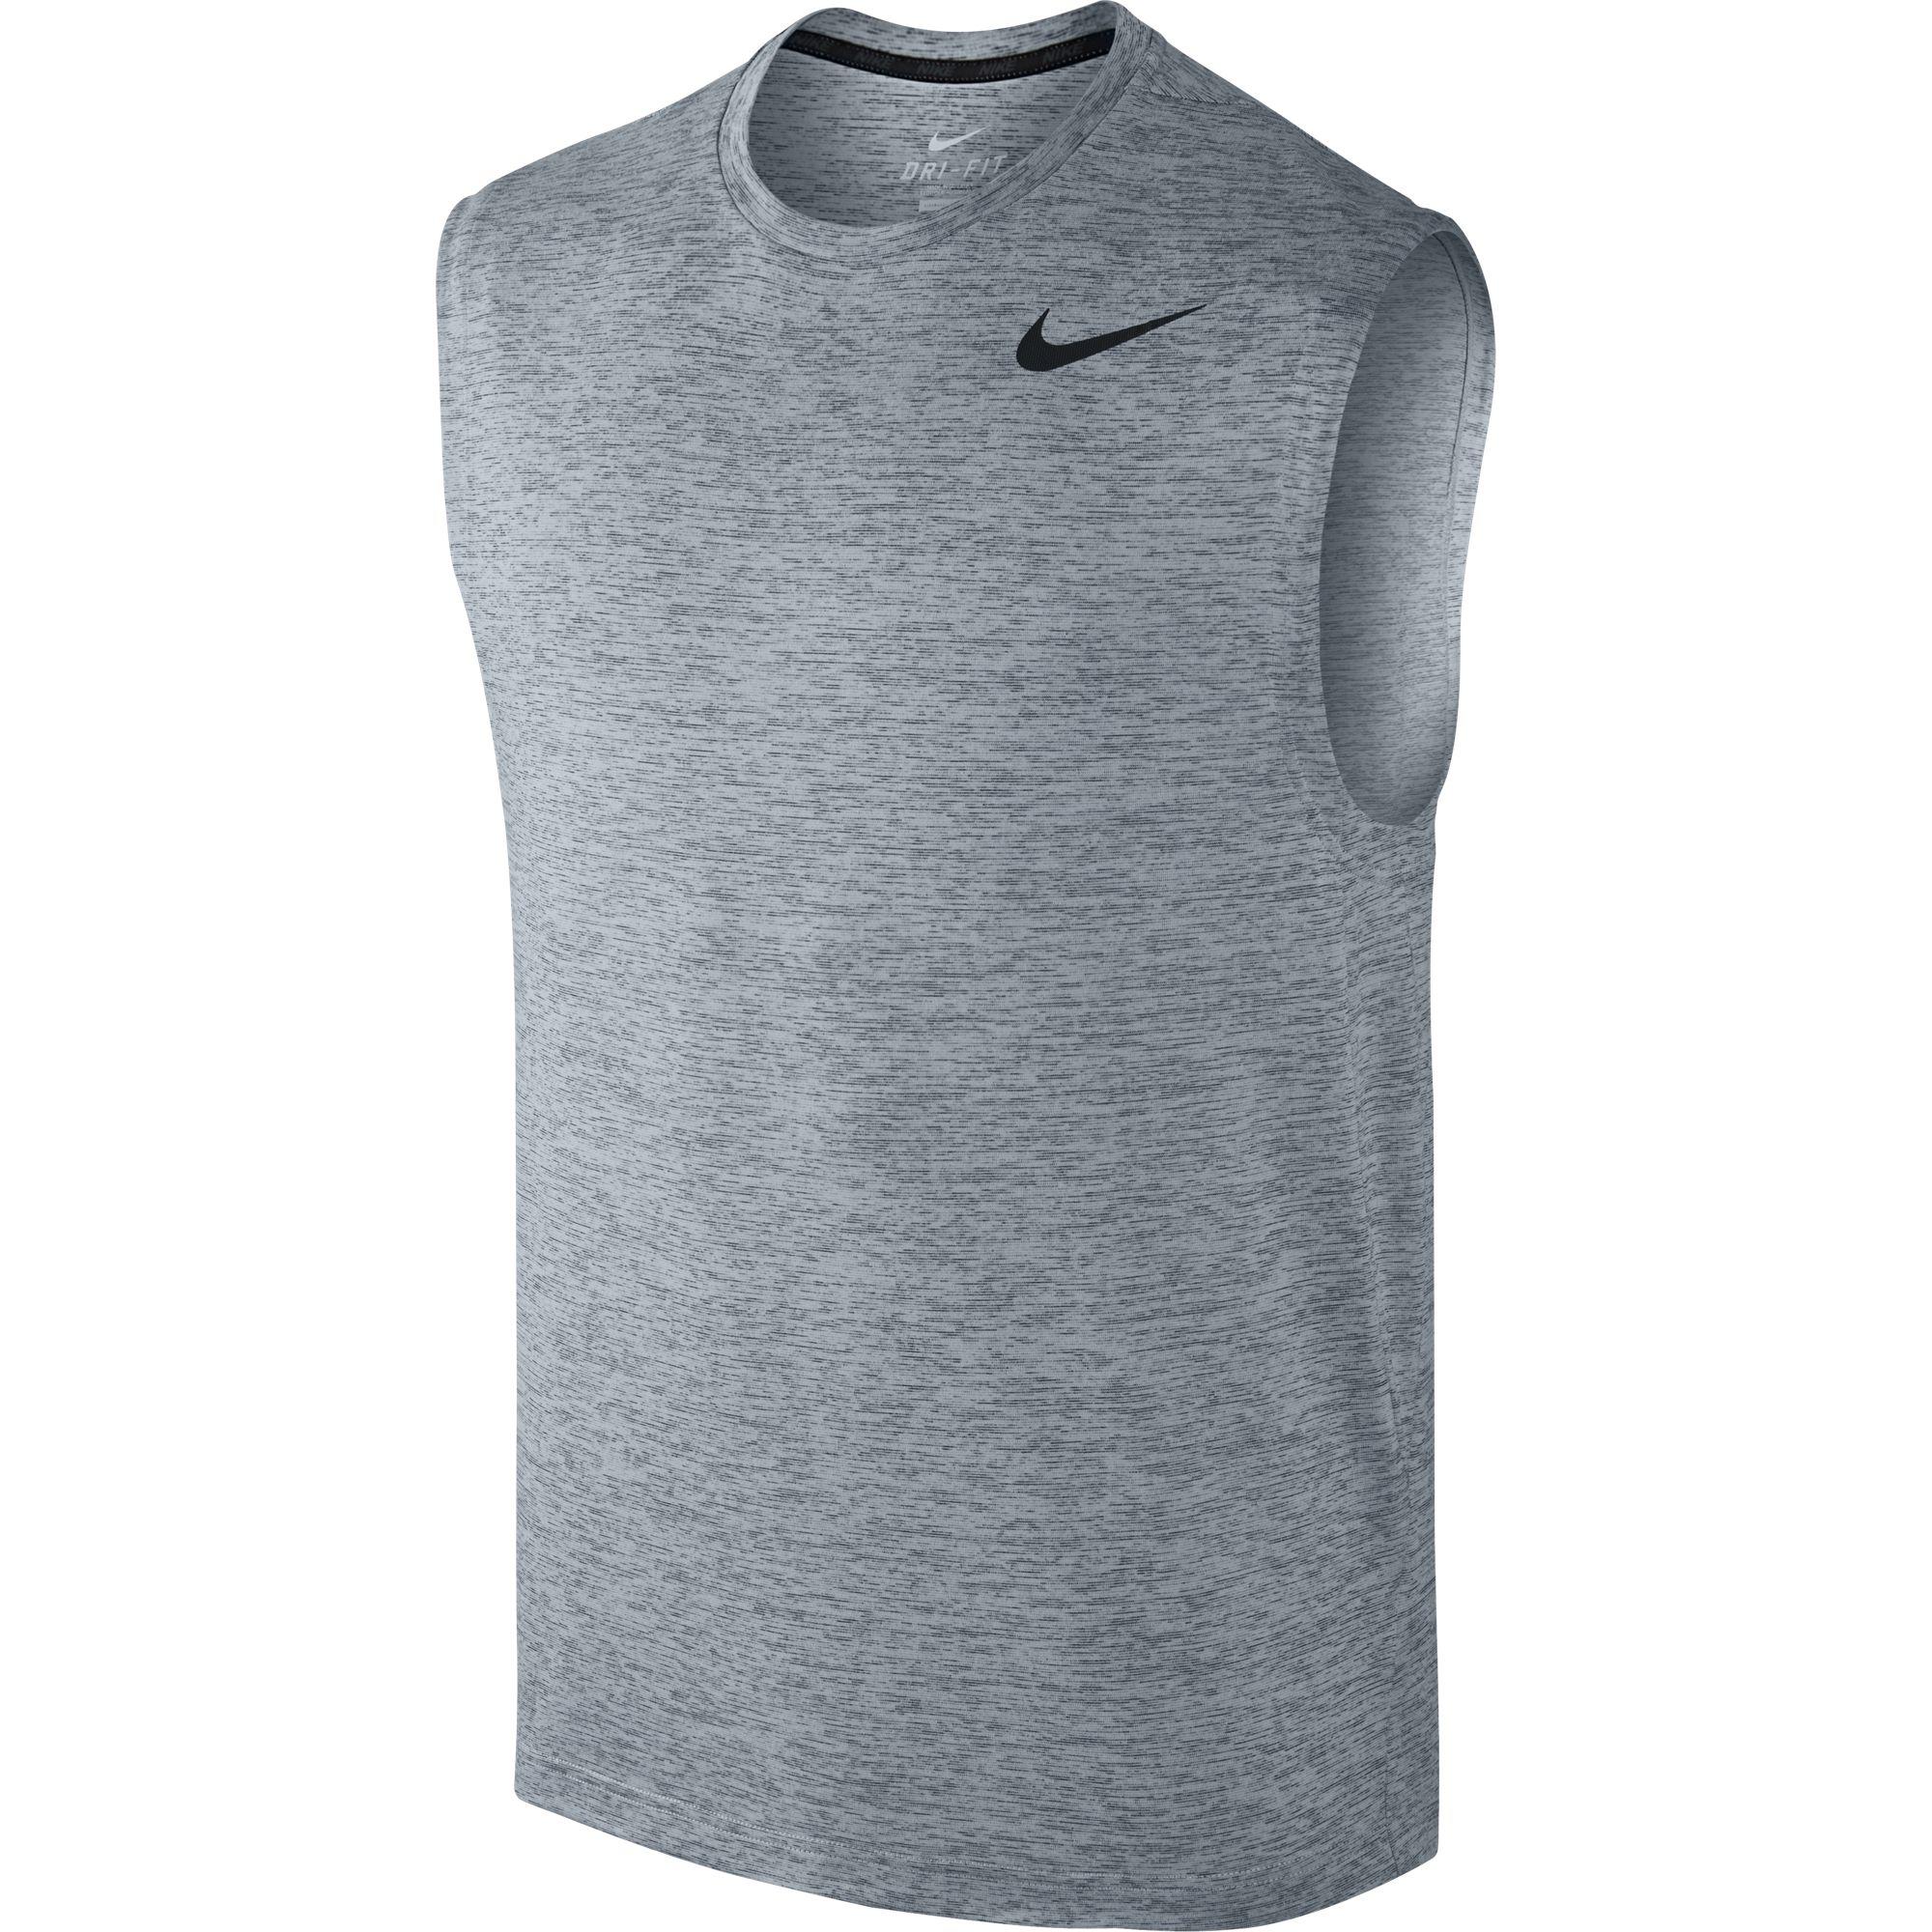 15 Minute Mens Workout Tank Tops Nike for Build Muscle